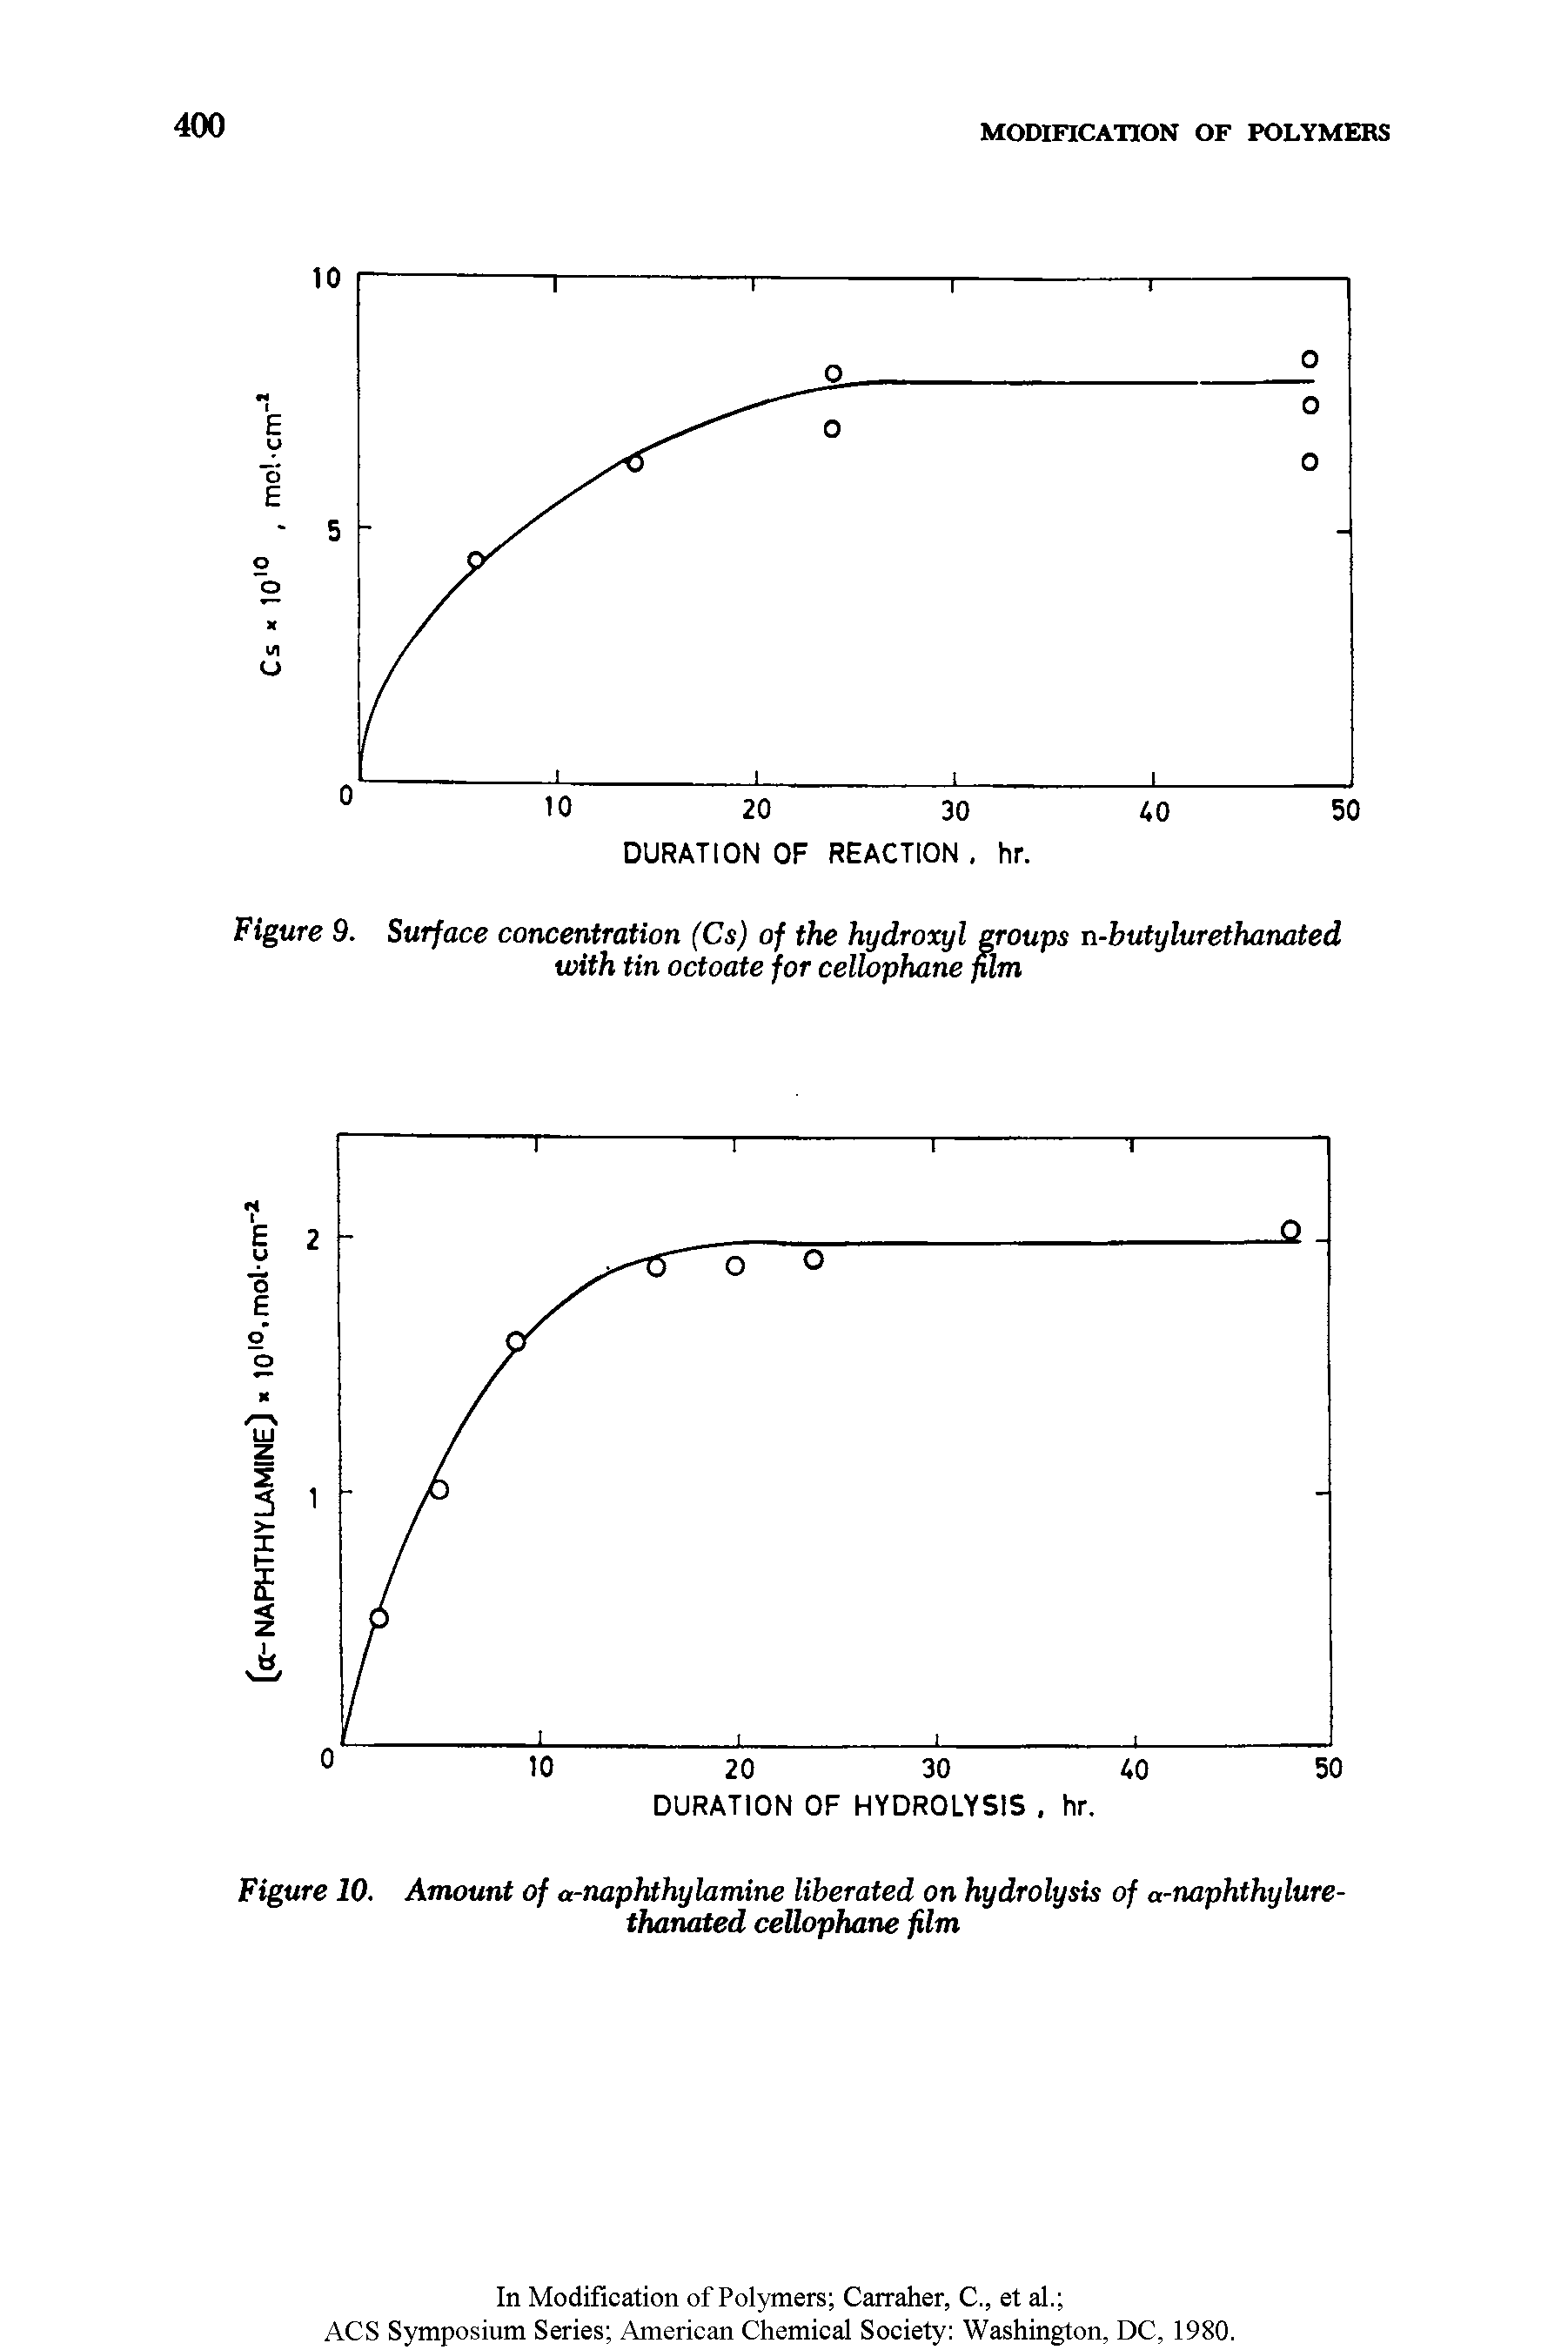 Figure 10. Amount of a-naphthylamine liberated on hydrolysis of a-naphthylure-thanated cellophane film...